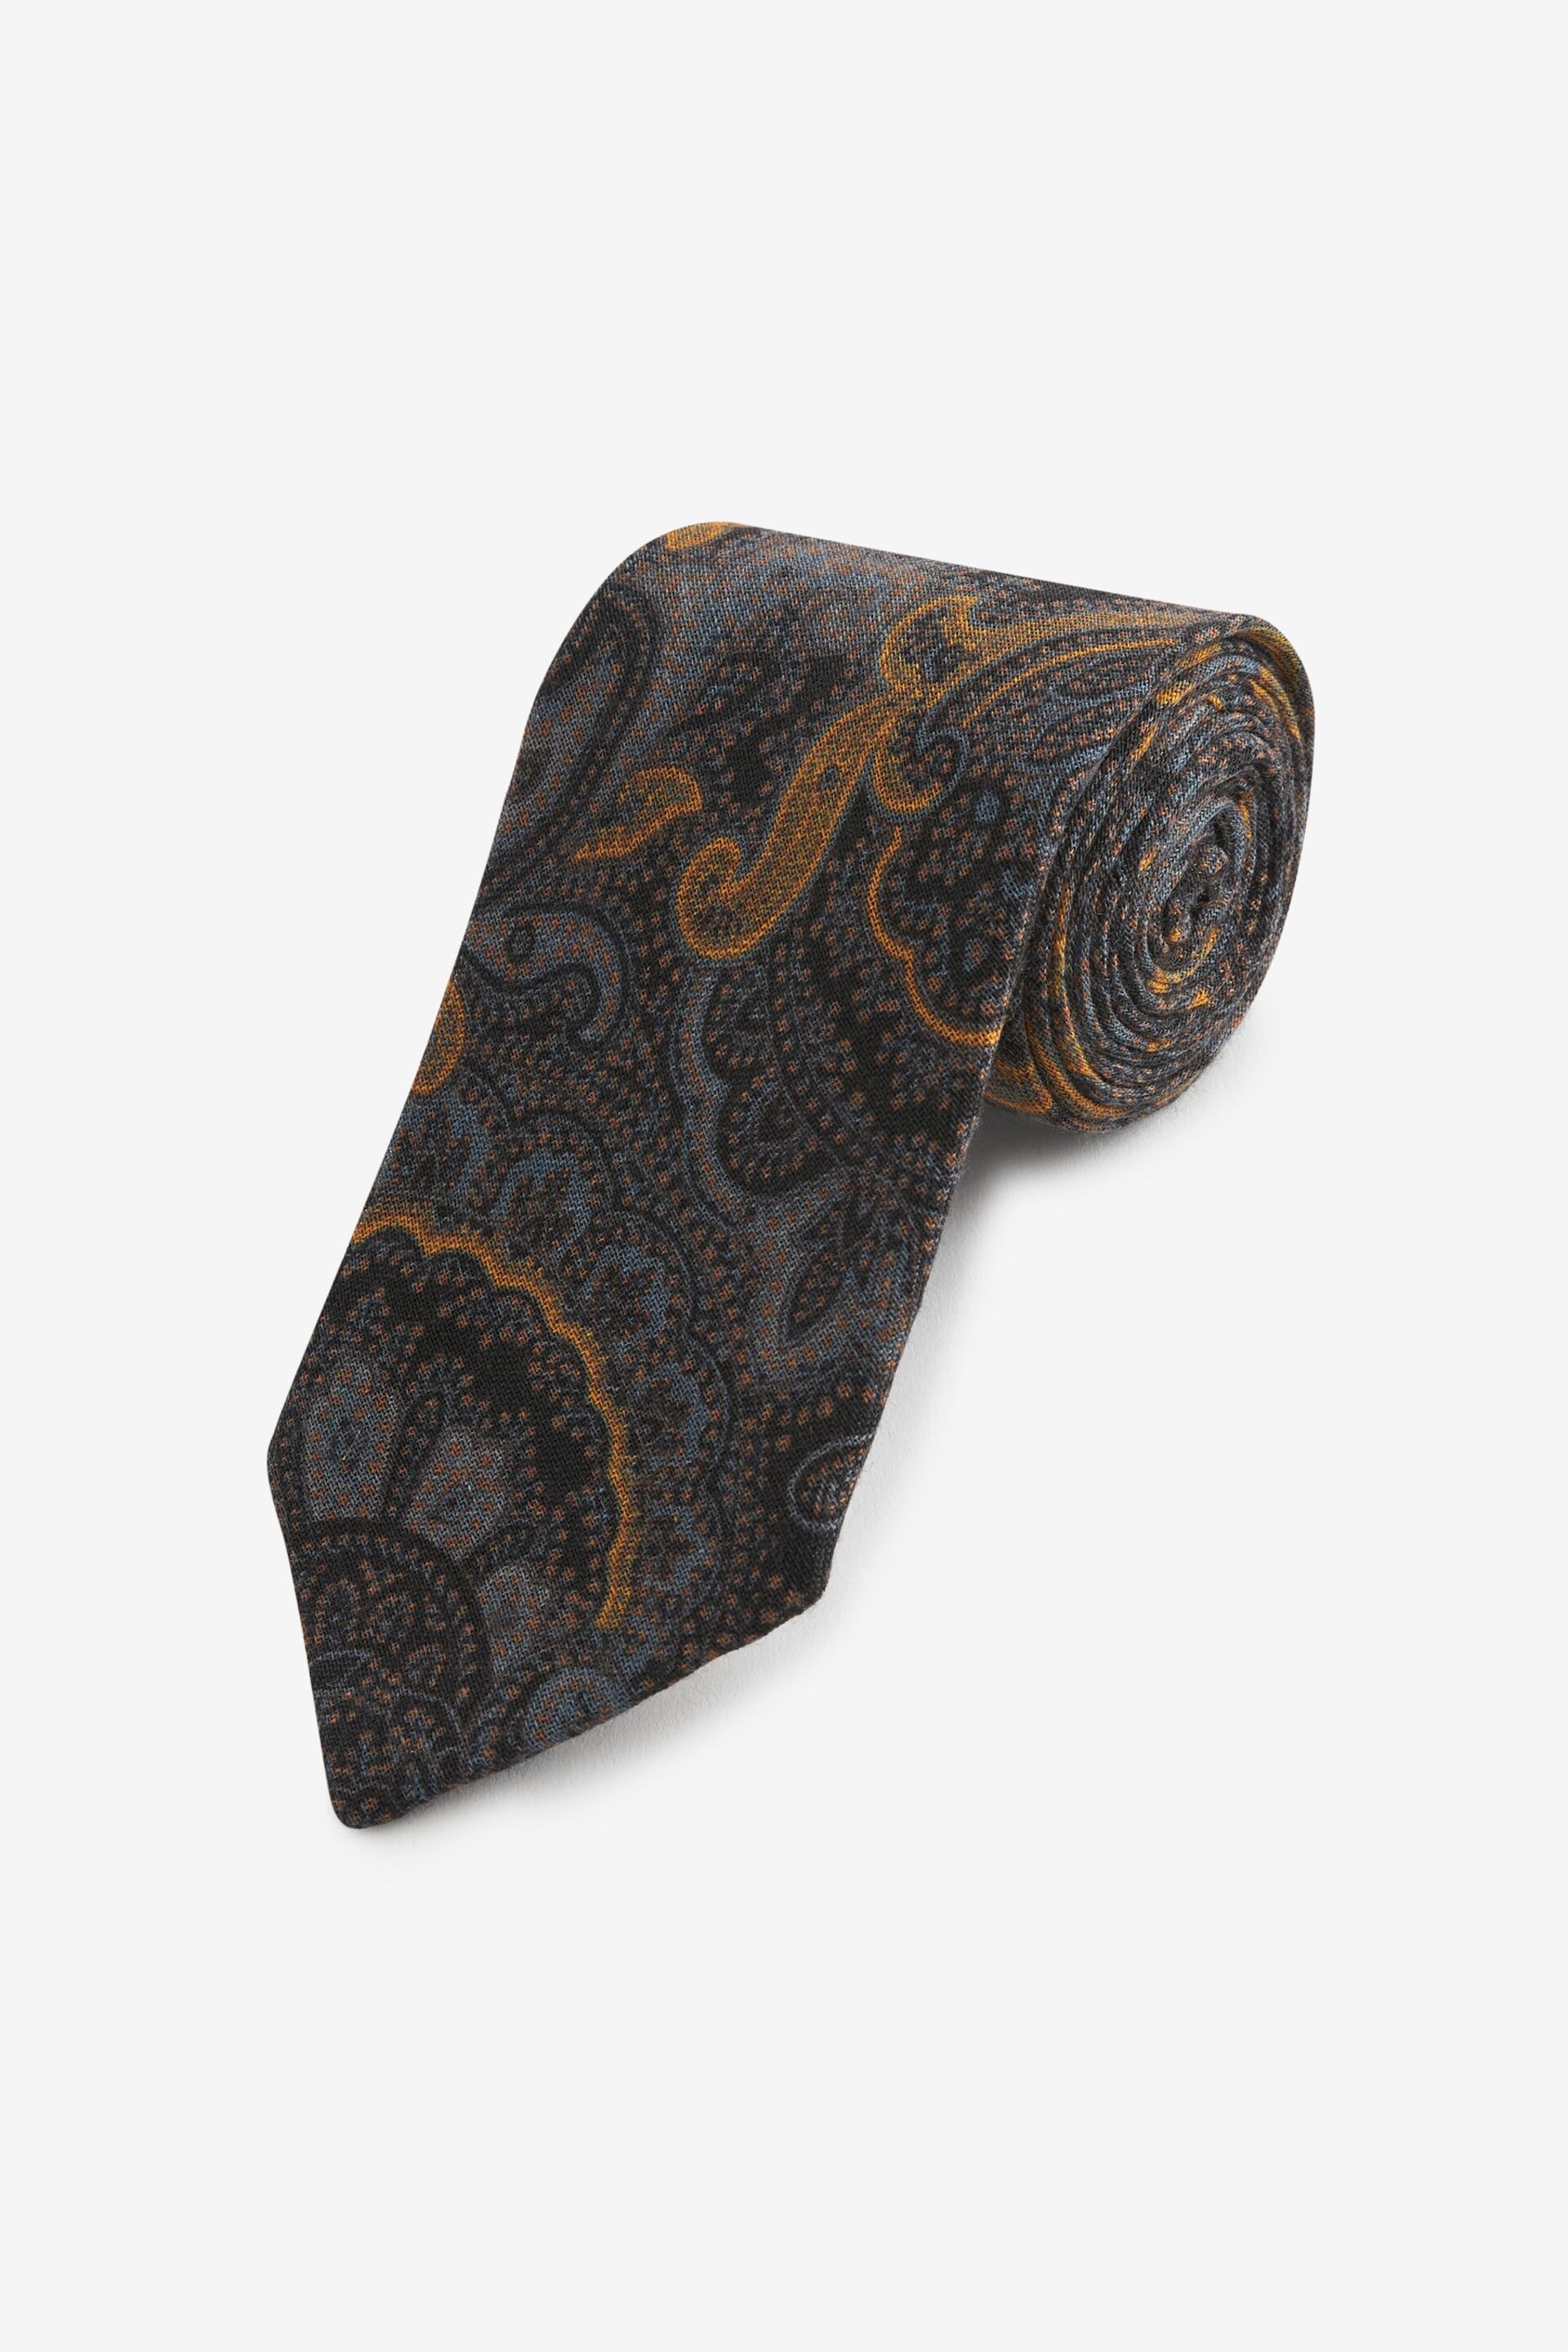 Grey Paisley Signature Made In Italy Silk Wool Blend Tie - Image 1 of 3